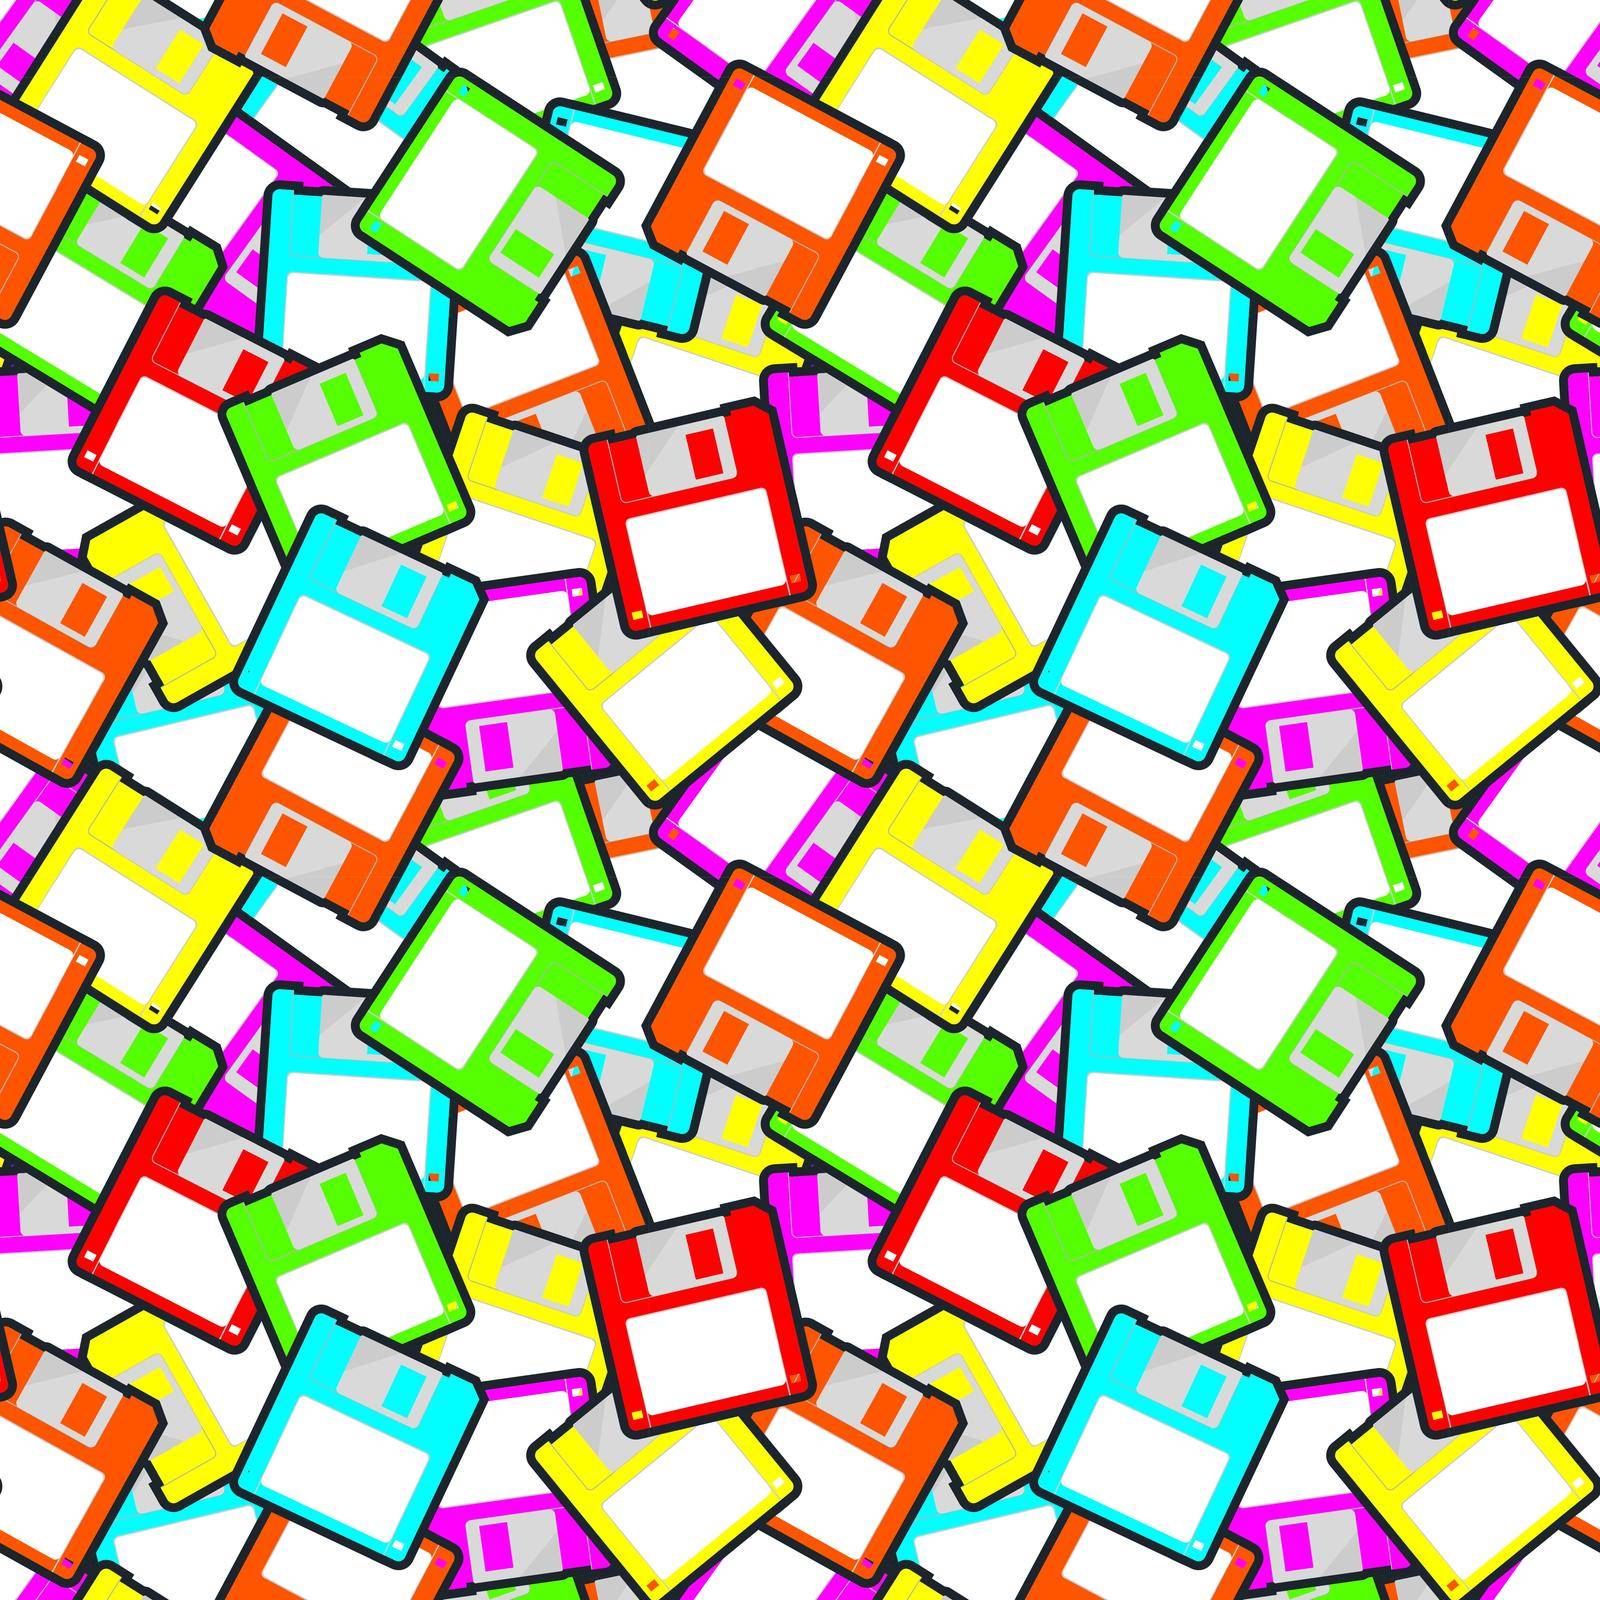 Colorful retro computer diskettes scattered in a pile on a seamless repeating background. Vector illustration.